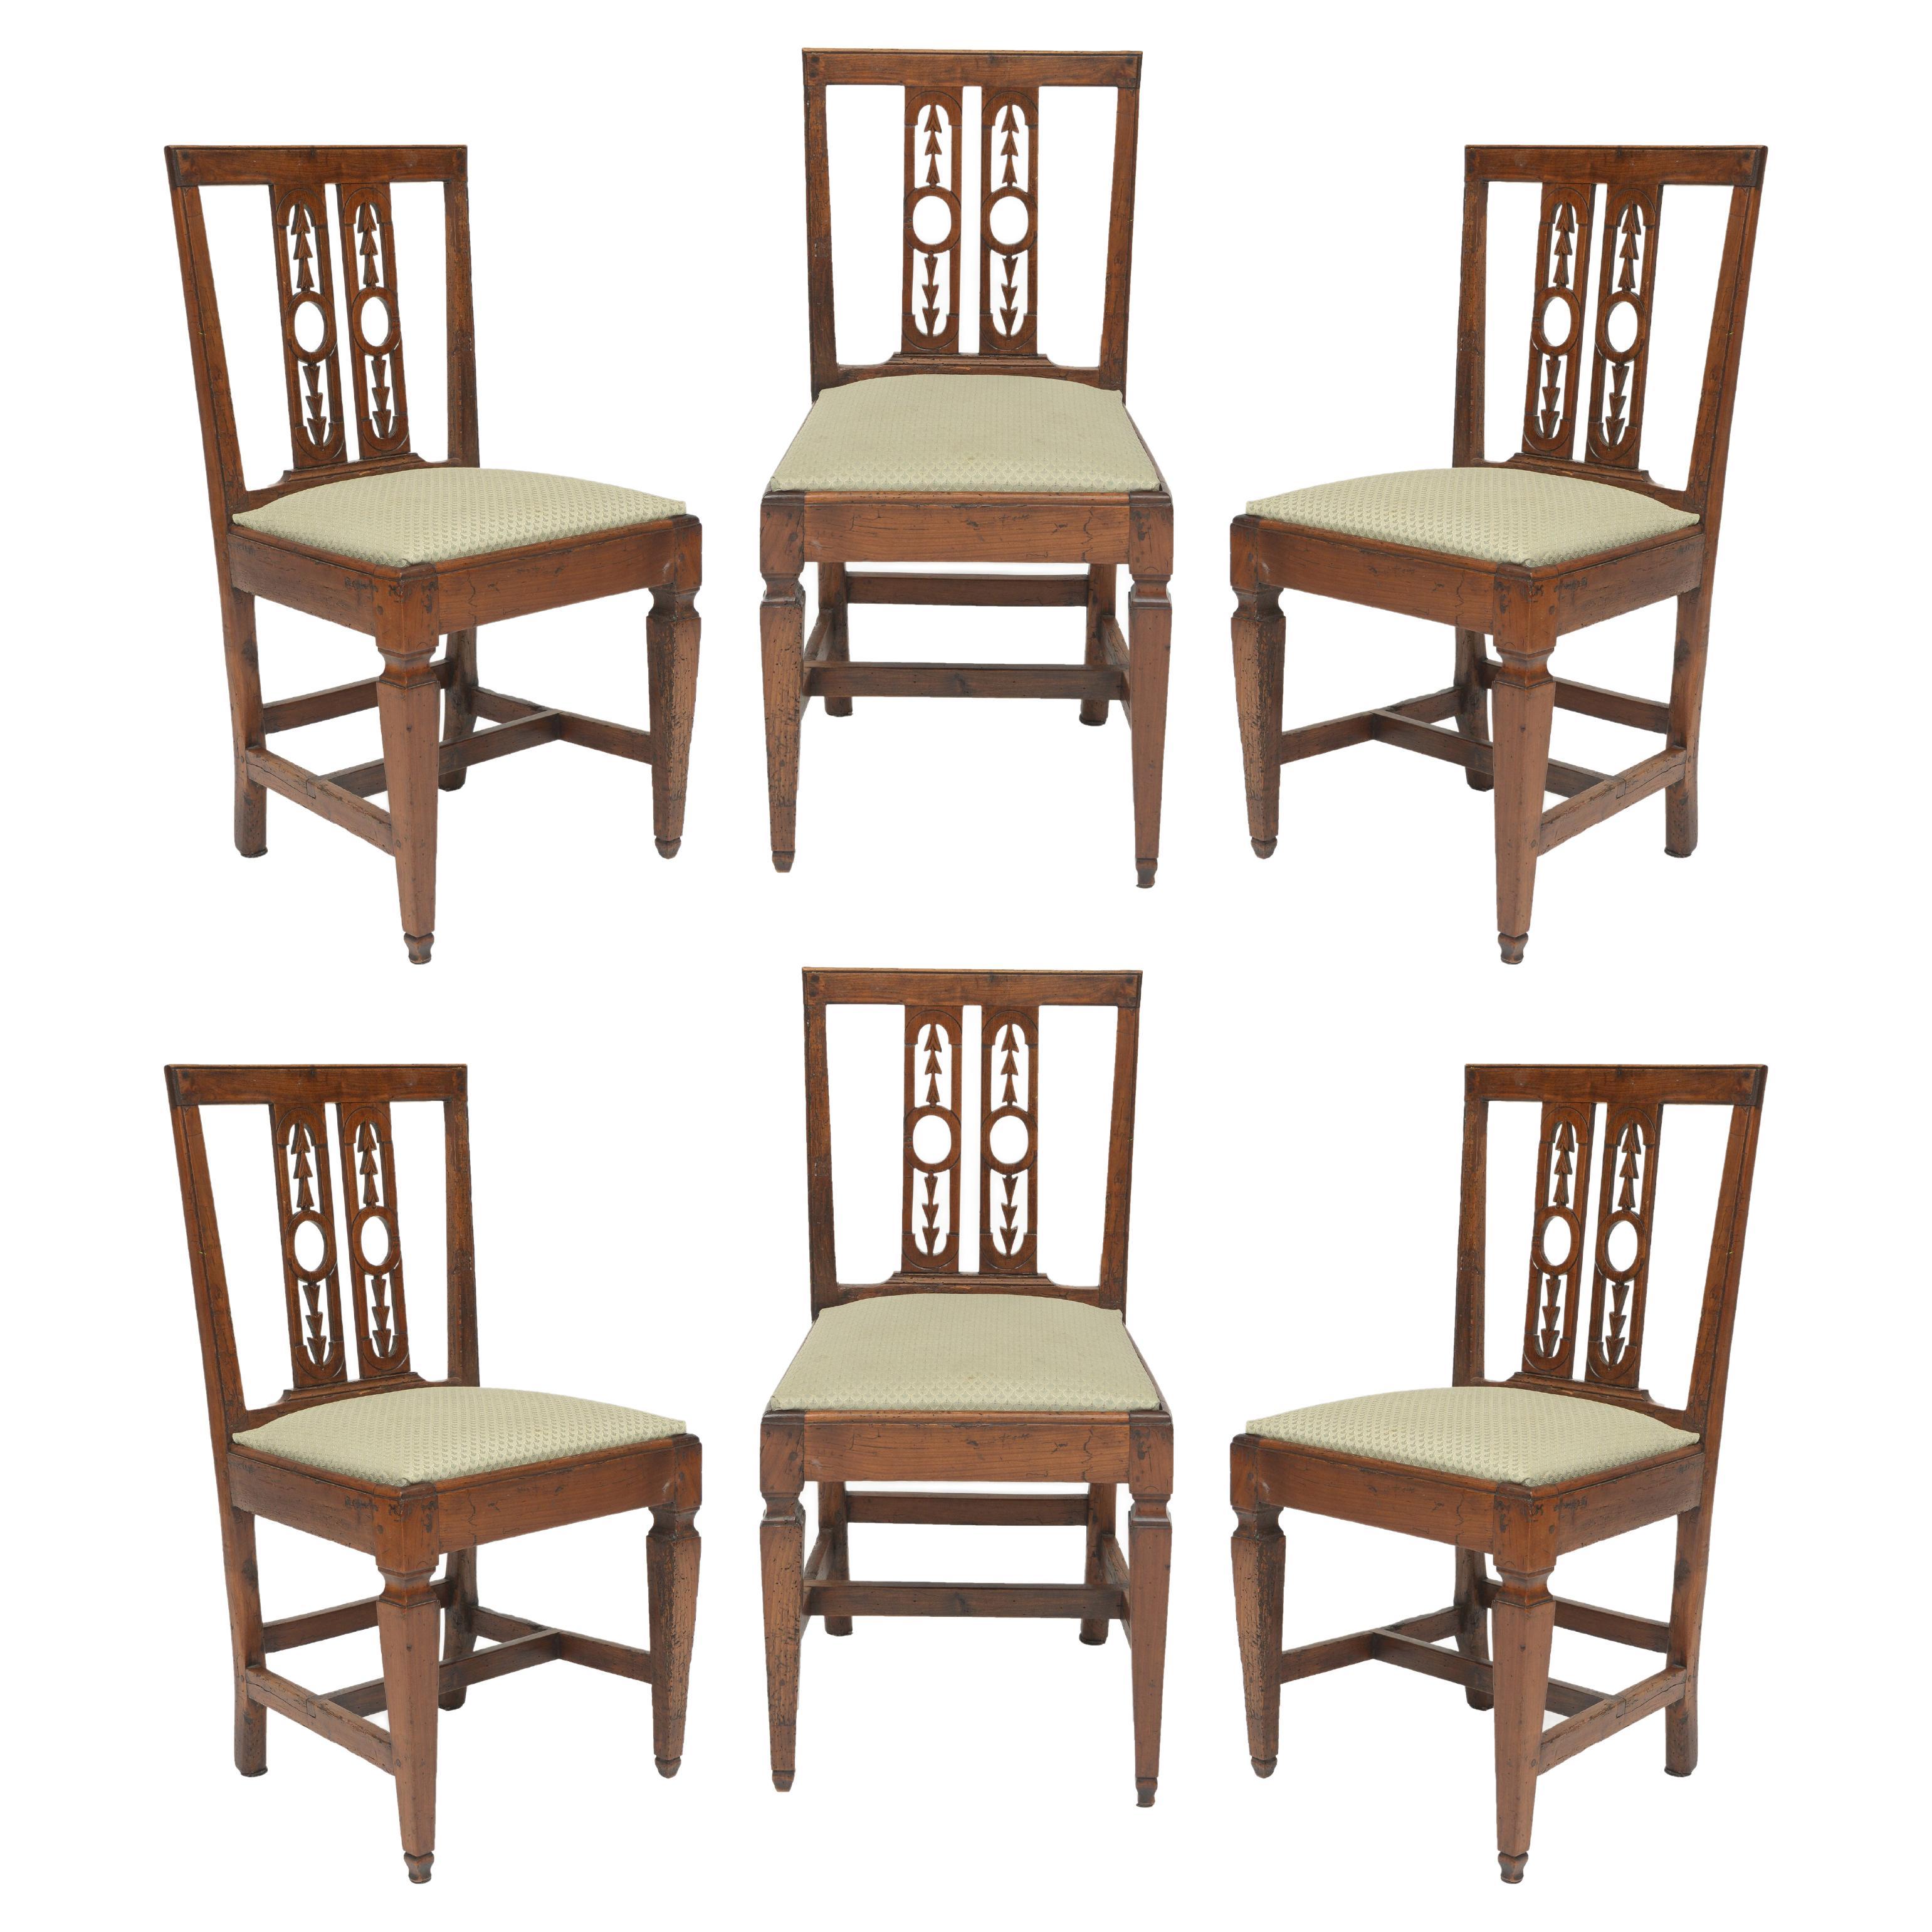 Early 19th Century Italian Dining Chairs - Set of 6 For Sale